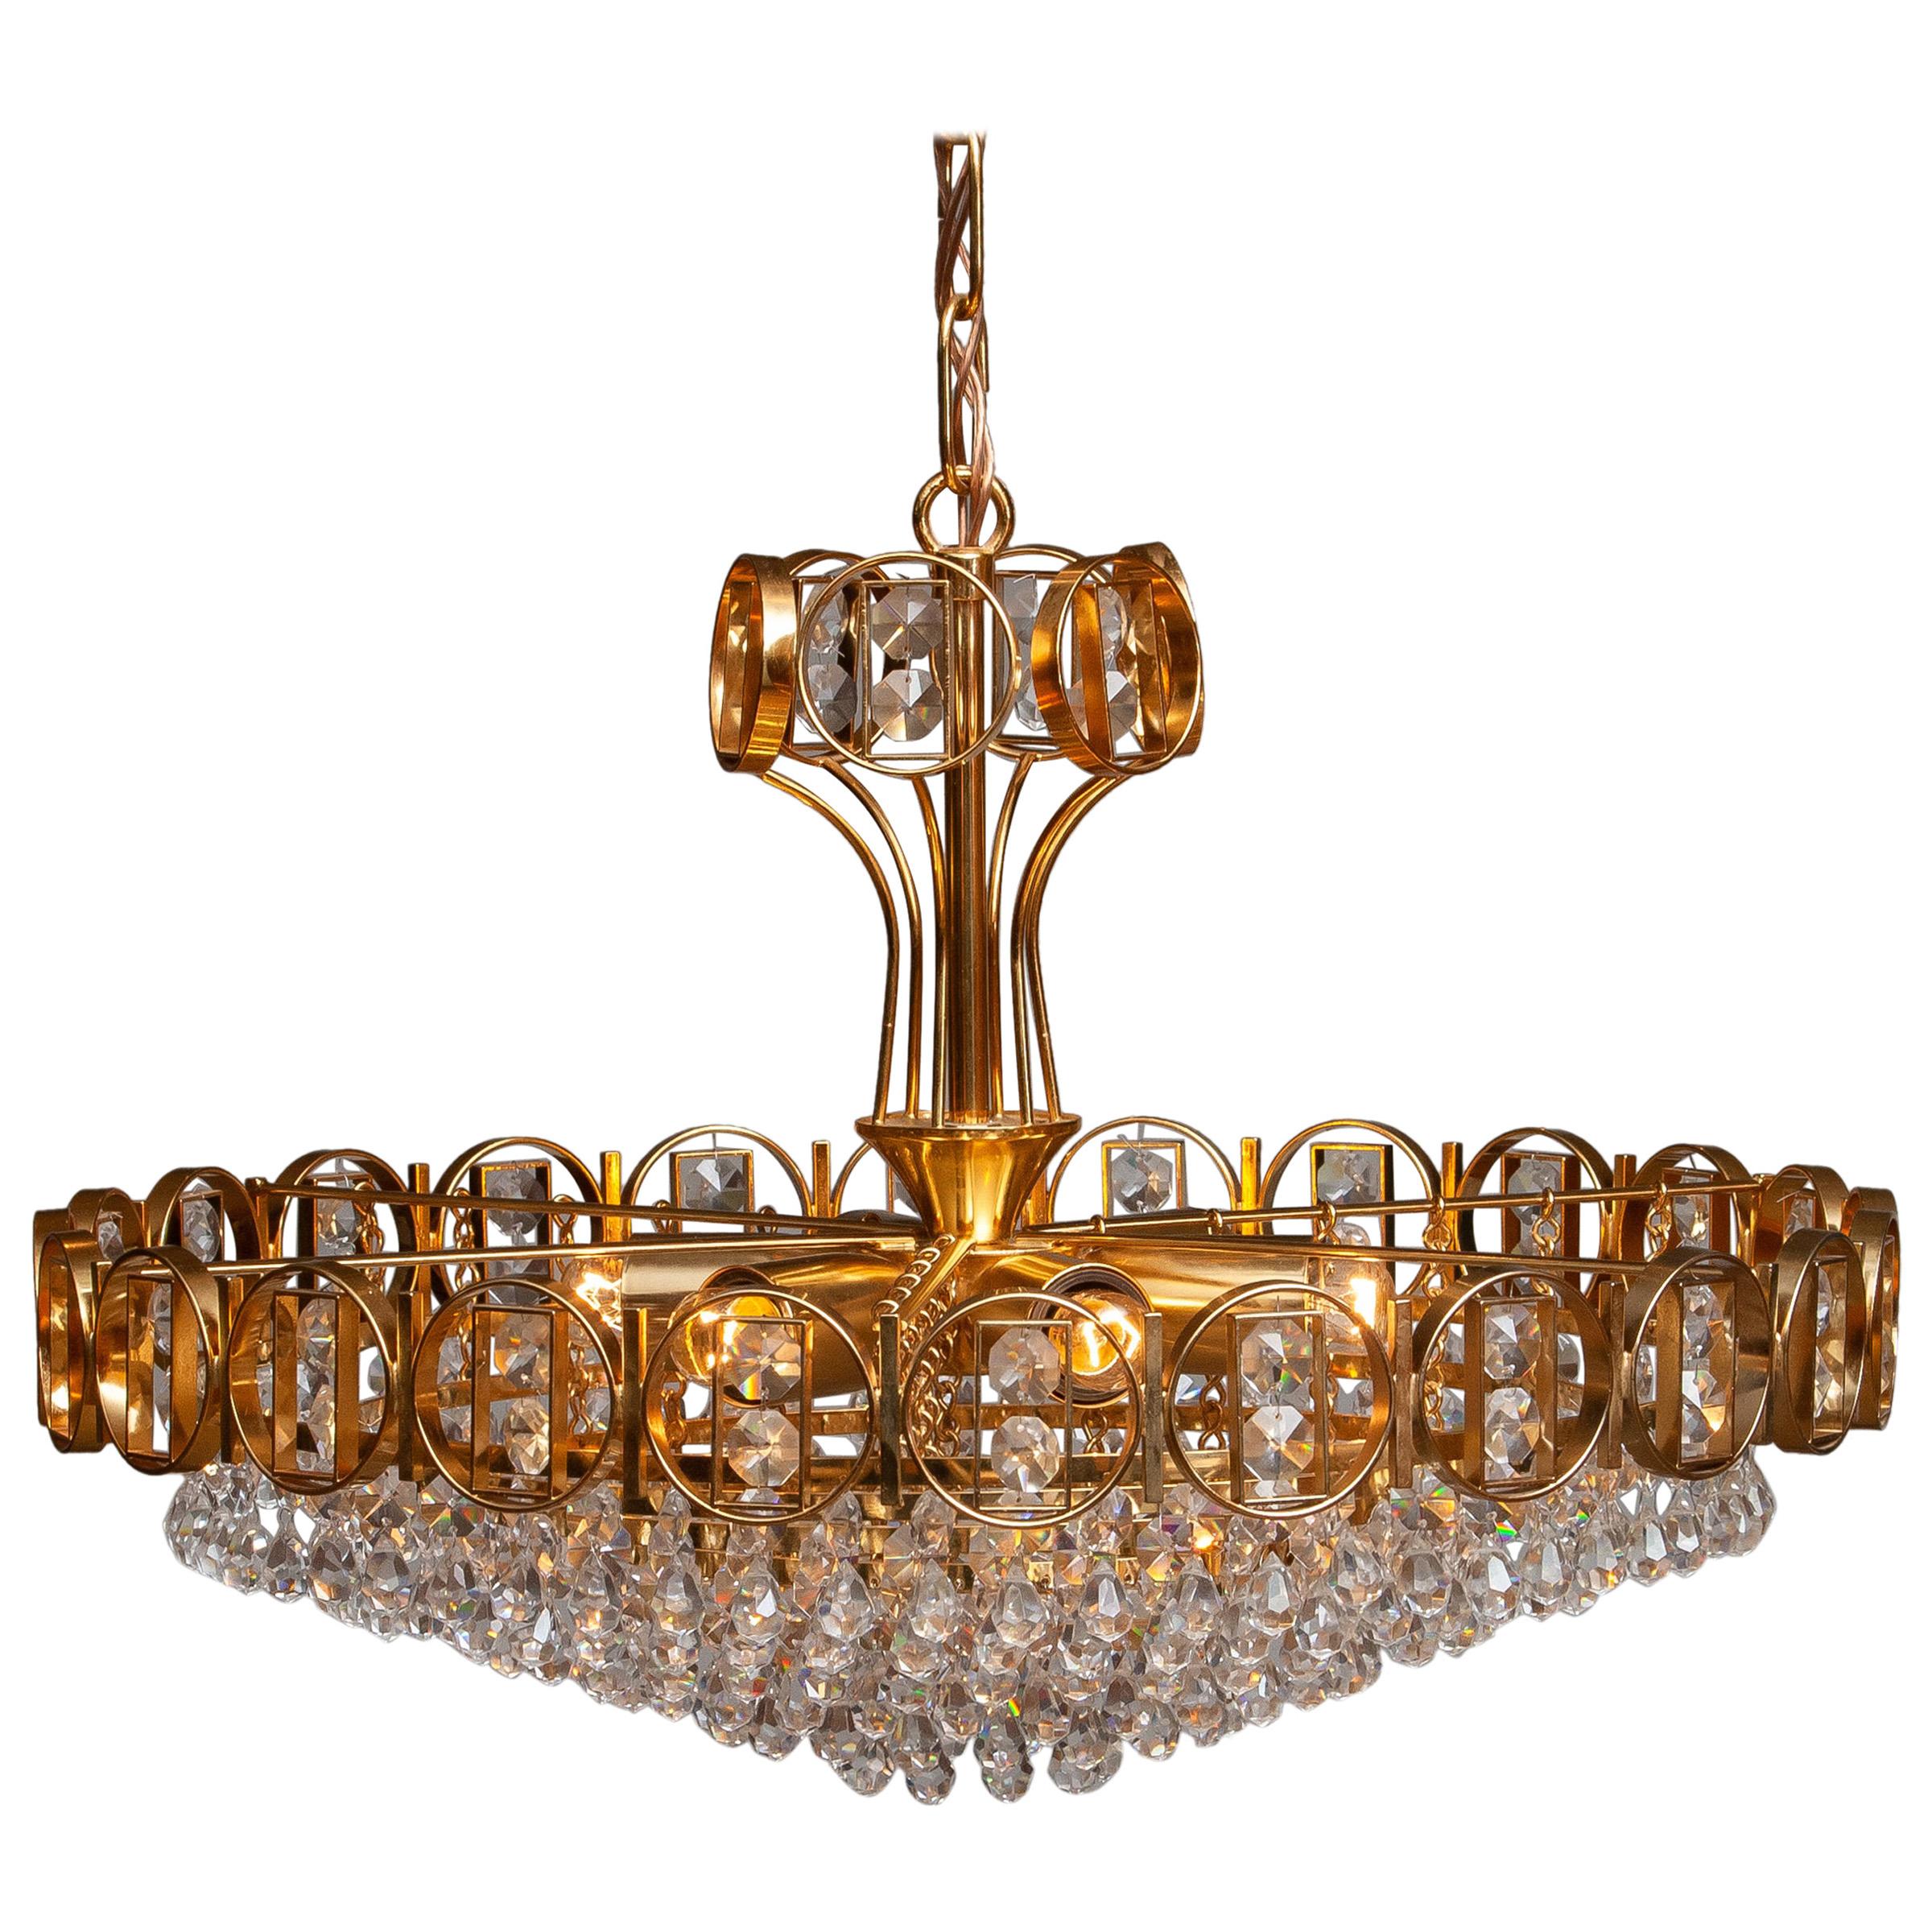 Beautiful brass gilded chandelier filed with faceted crystals made by Palwa, Germany, 1970.
This chandelier consist out of a gold-plated crown with inside six gold plaited rings filed with crystals and on top also a smaller gold plaited